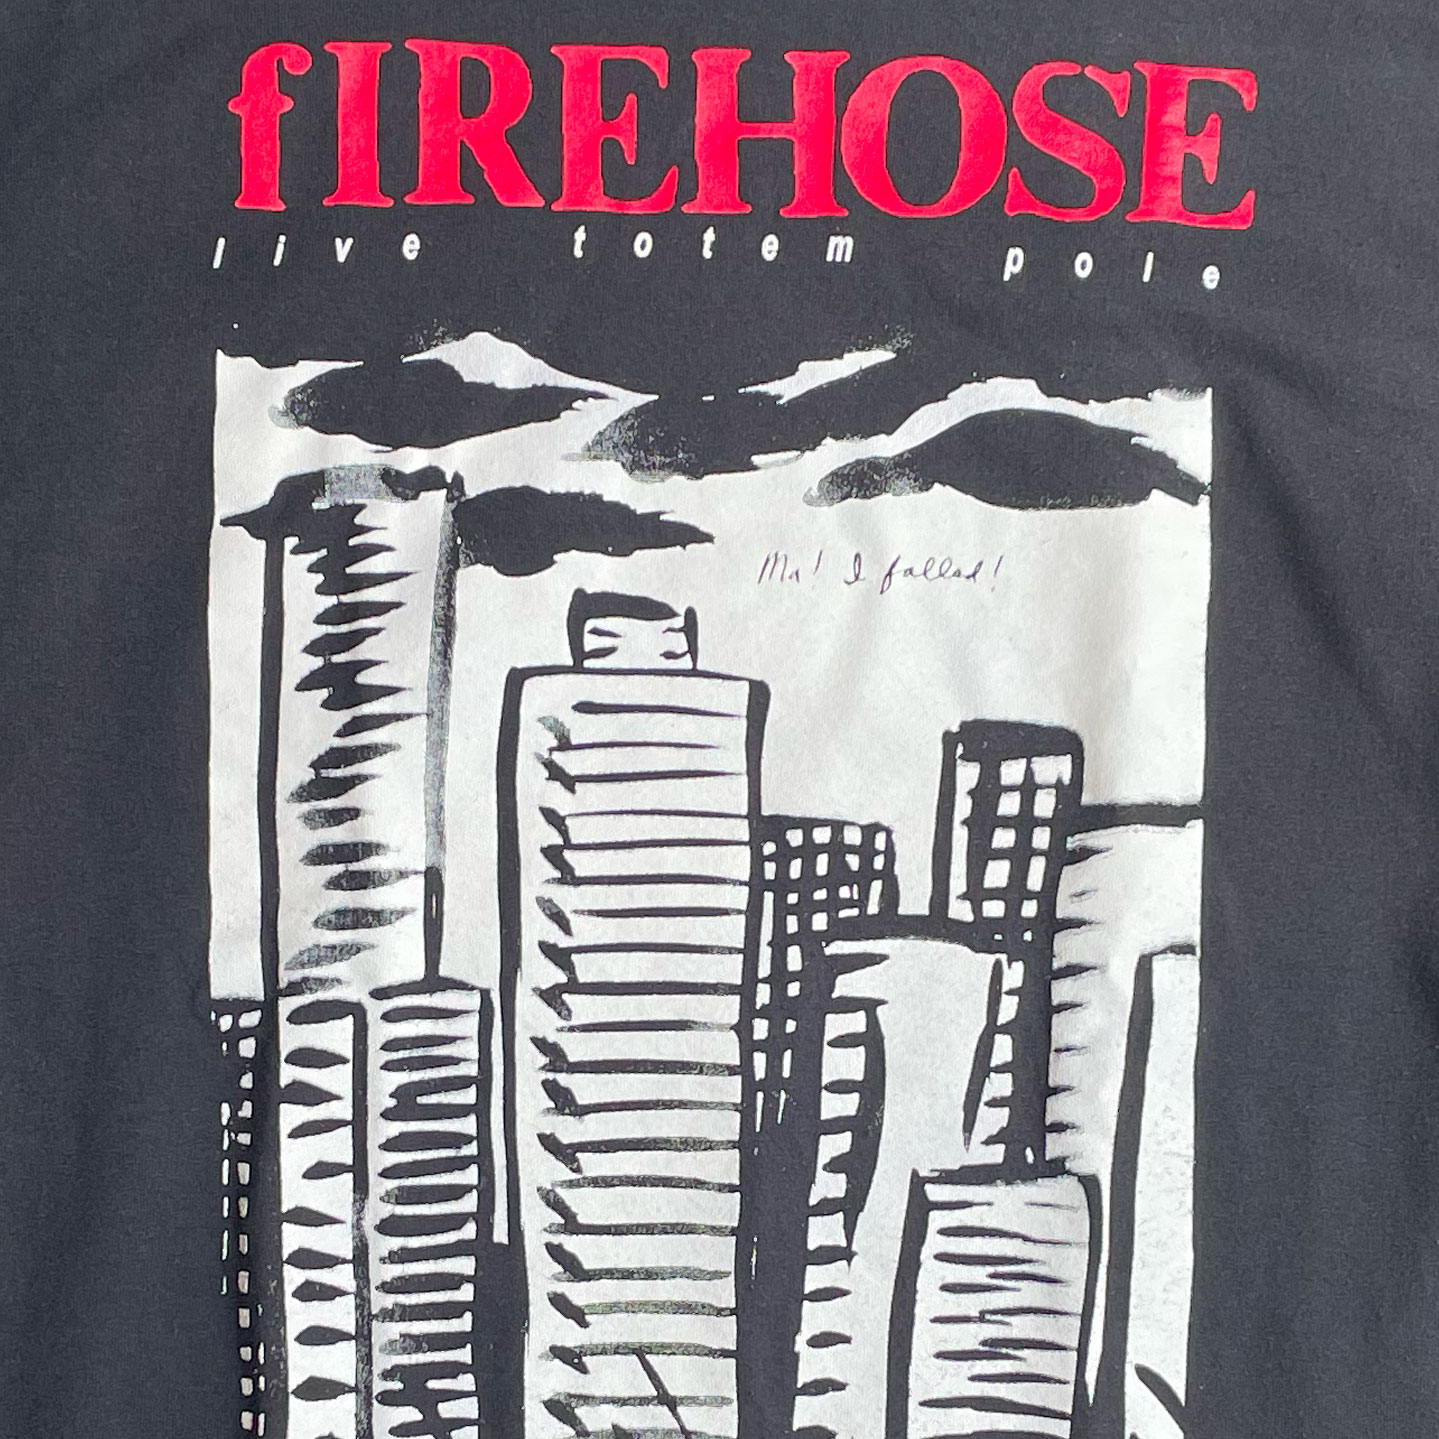 USED! fIREHOSE Tシャツ Live Totem Pole